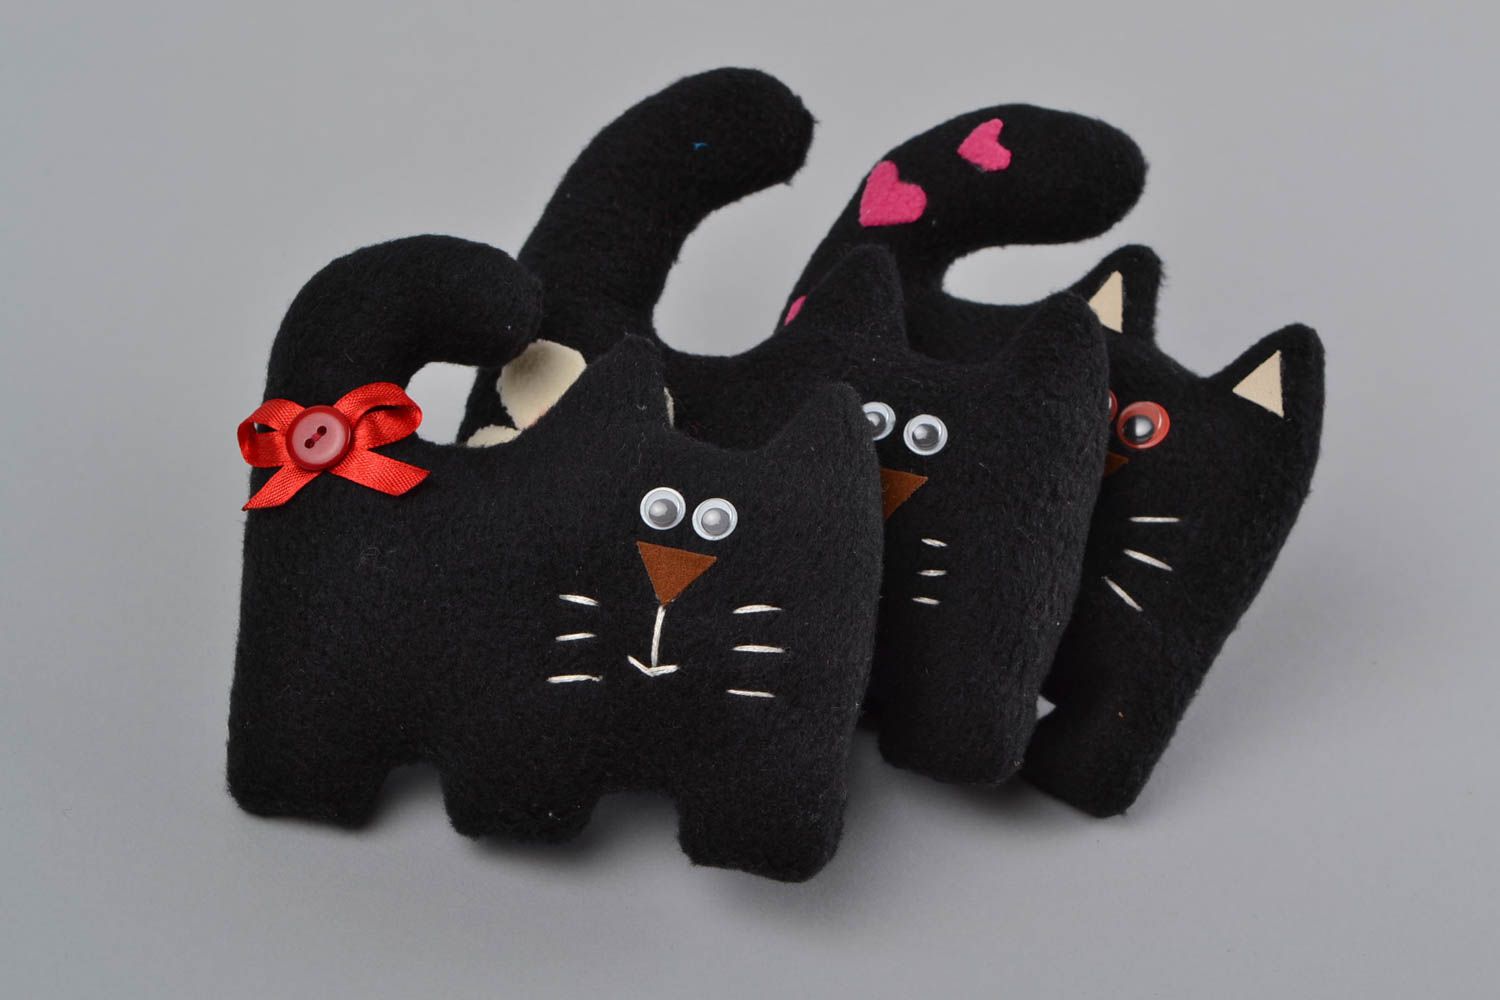 Handmade small soft toy sewn of black fleece in the shape of cat with red bow photo 1